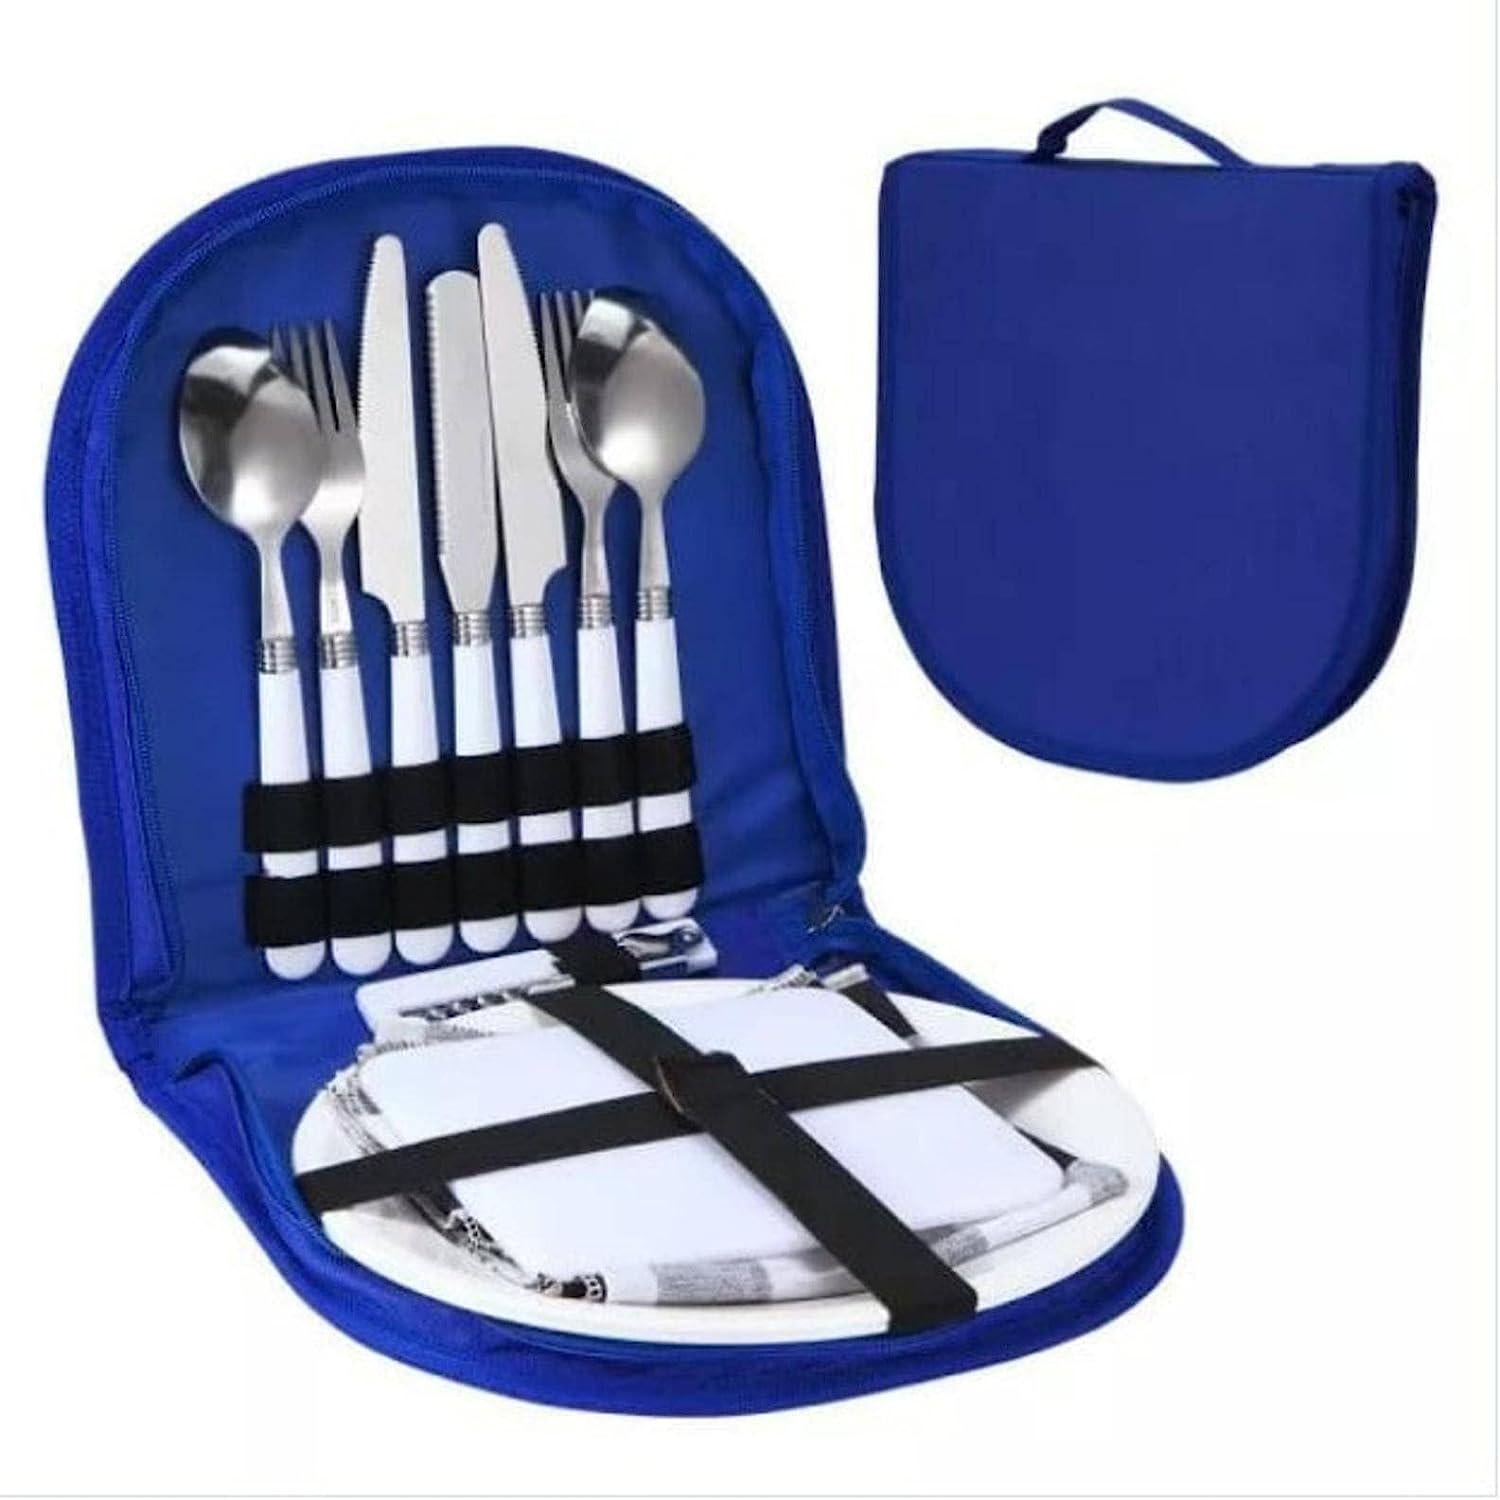 SAXTZDS Outdoor Picnic kit 2-Person Set Outdoor Picnic Plastic Cutlery Set with Napkin Outdoor Portable Tableware Set